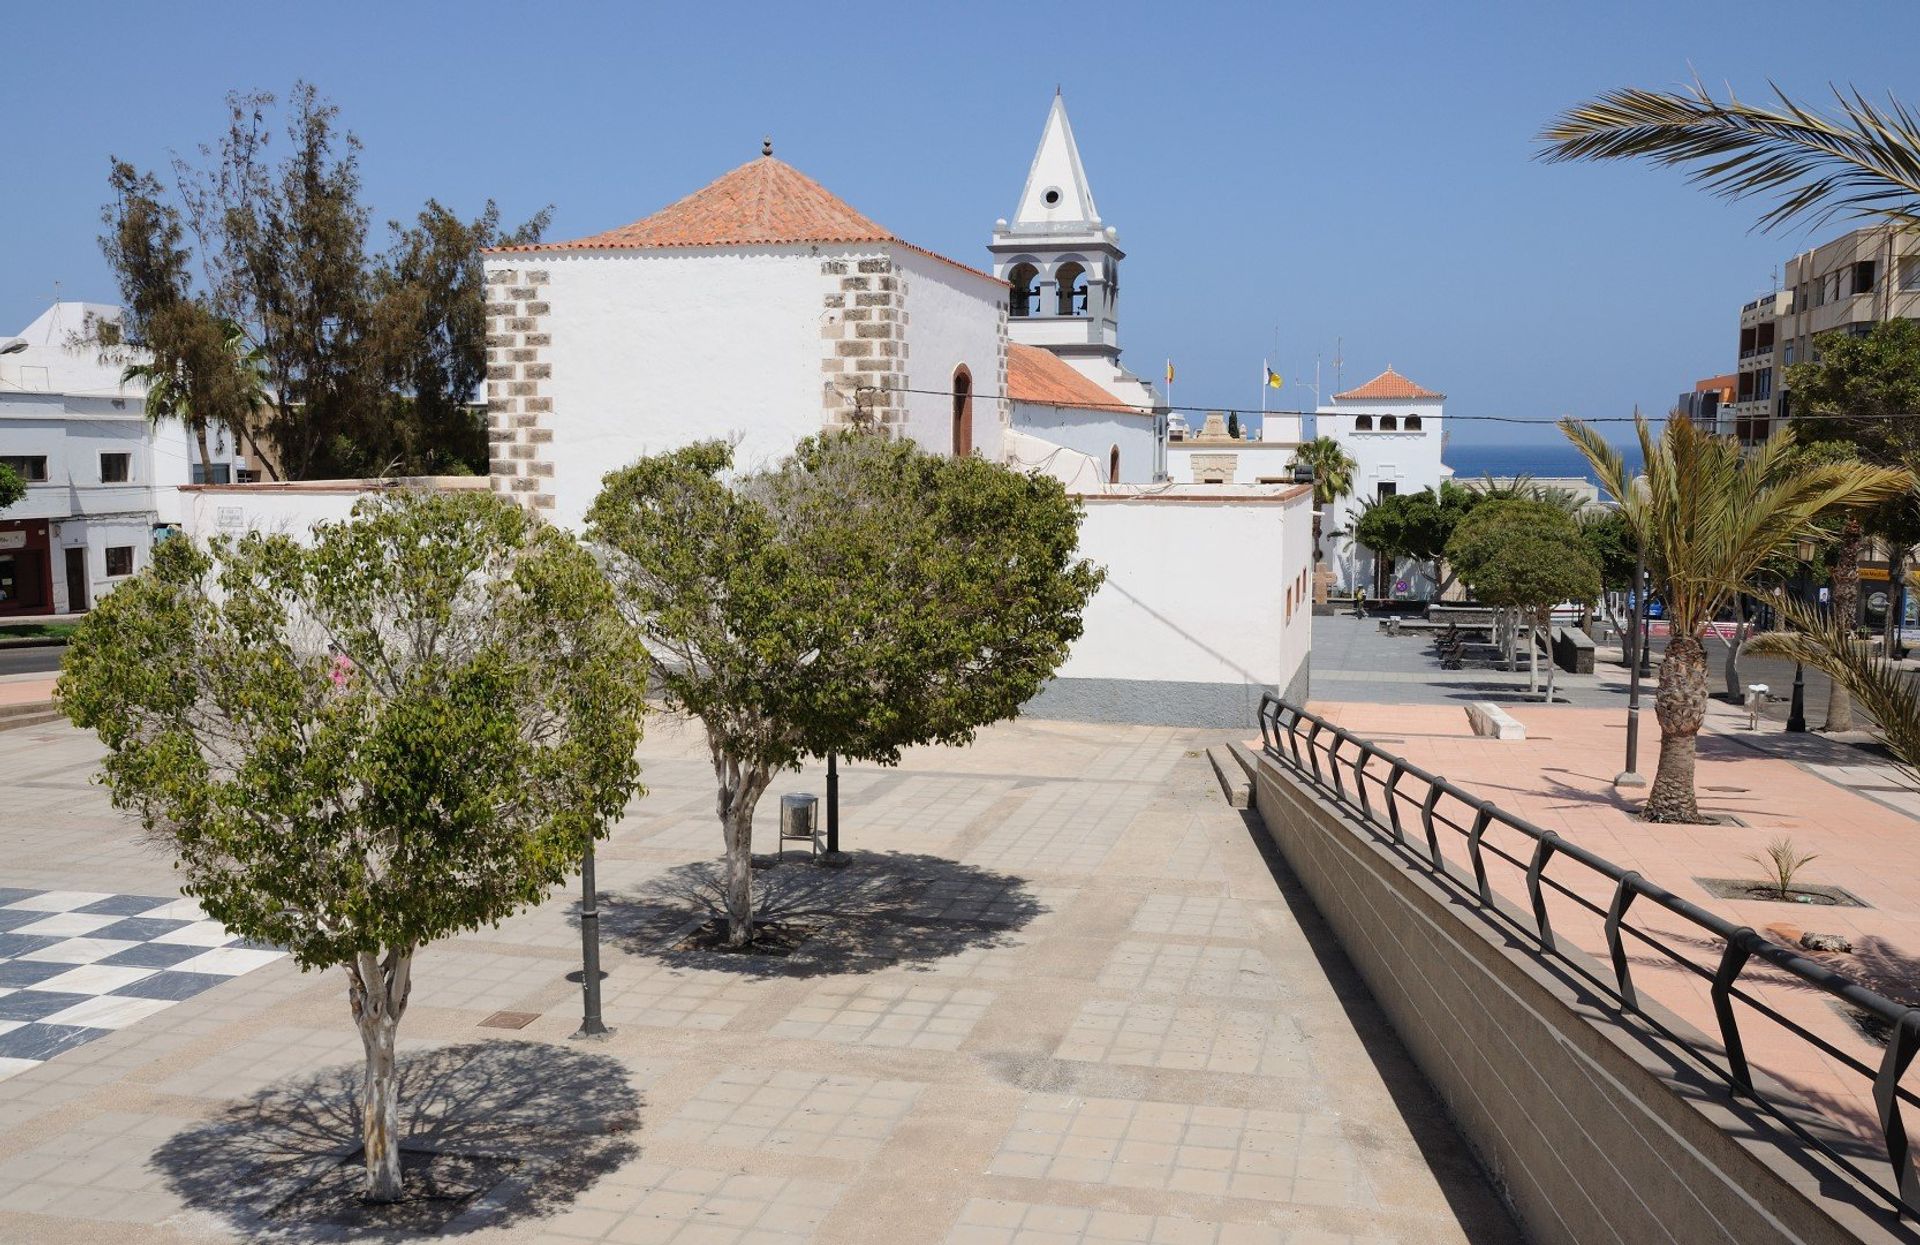 The sun-drenched ancient square of the island's capital, Puerto del Rosario